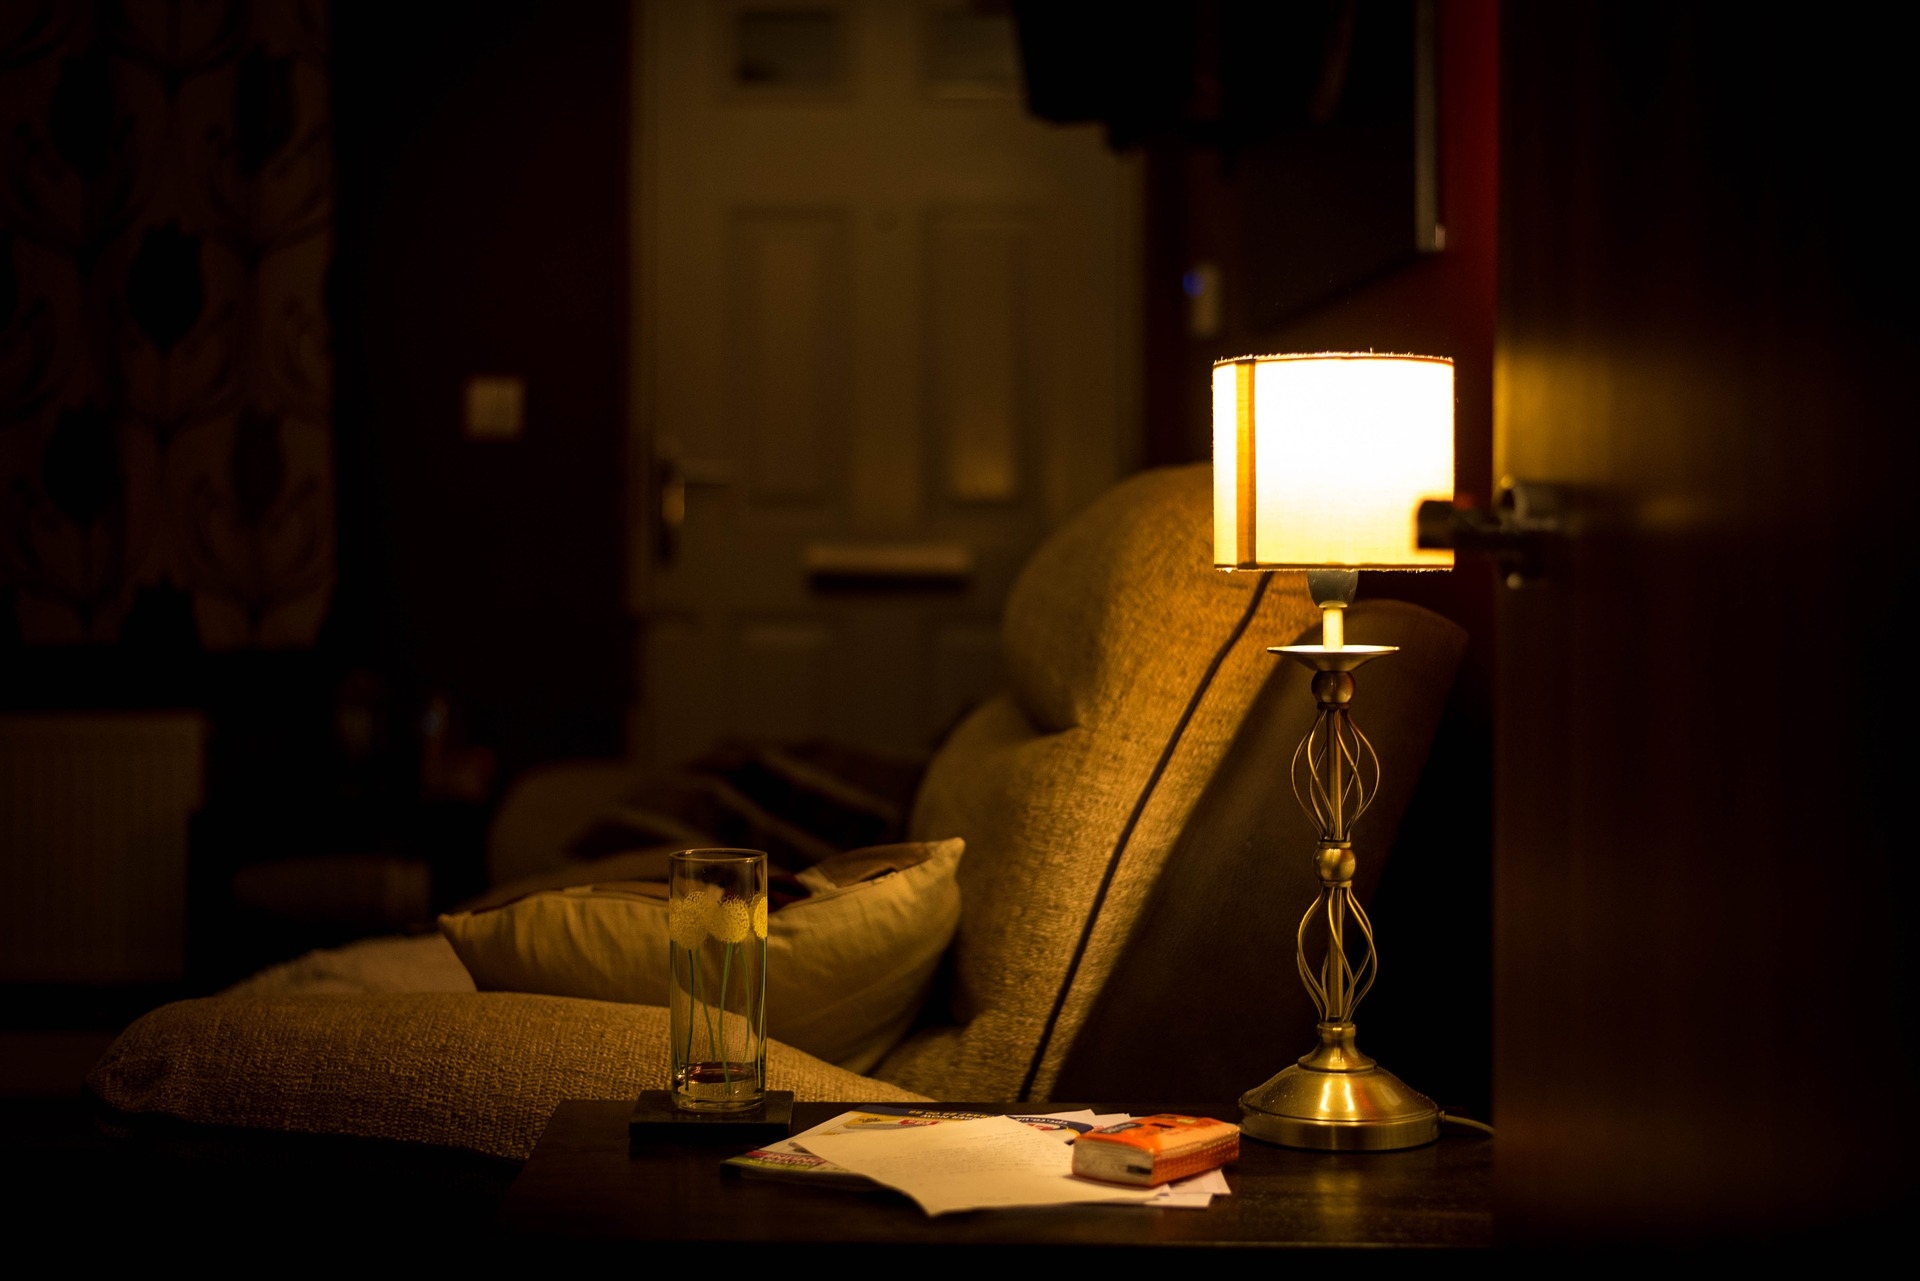 How To Dim Lights Without A Dimmer - LampHQ